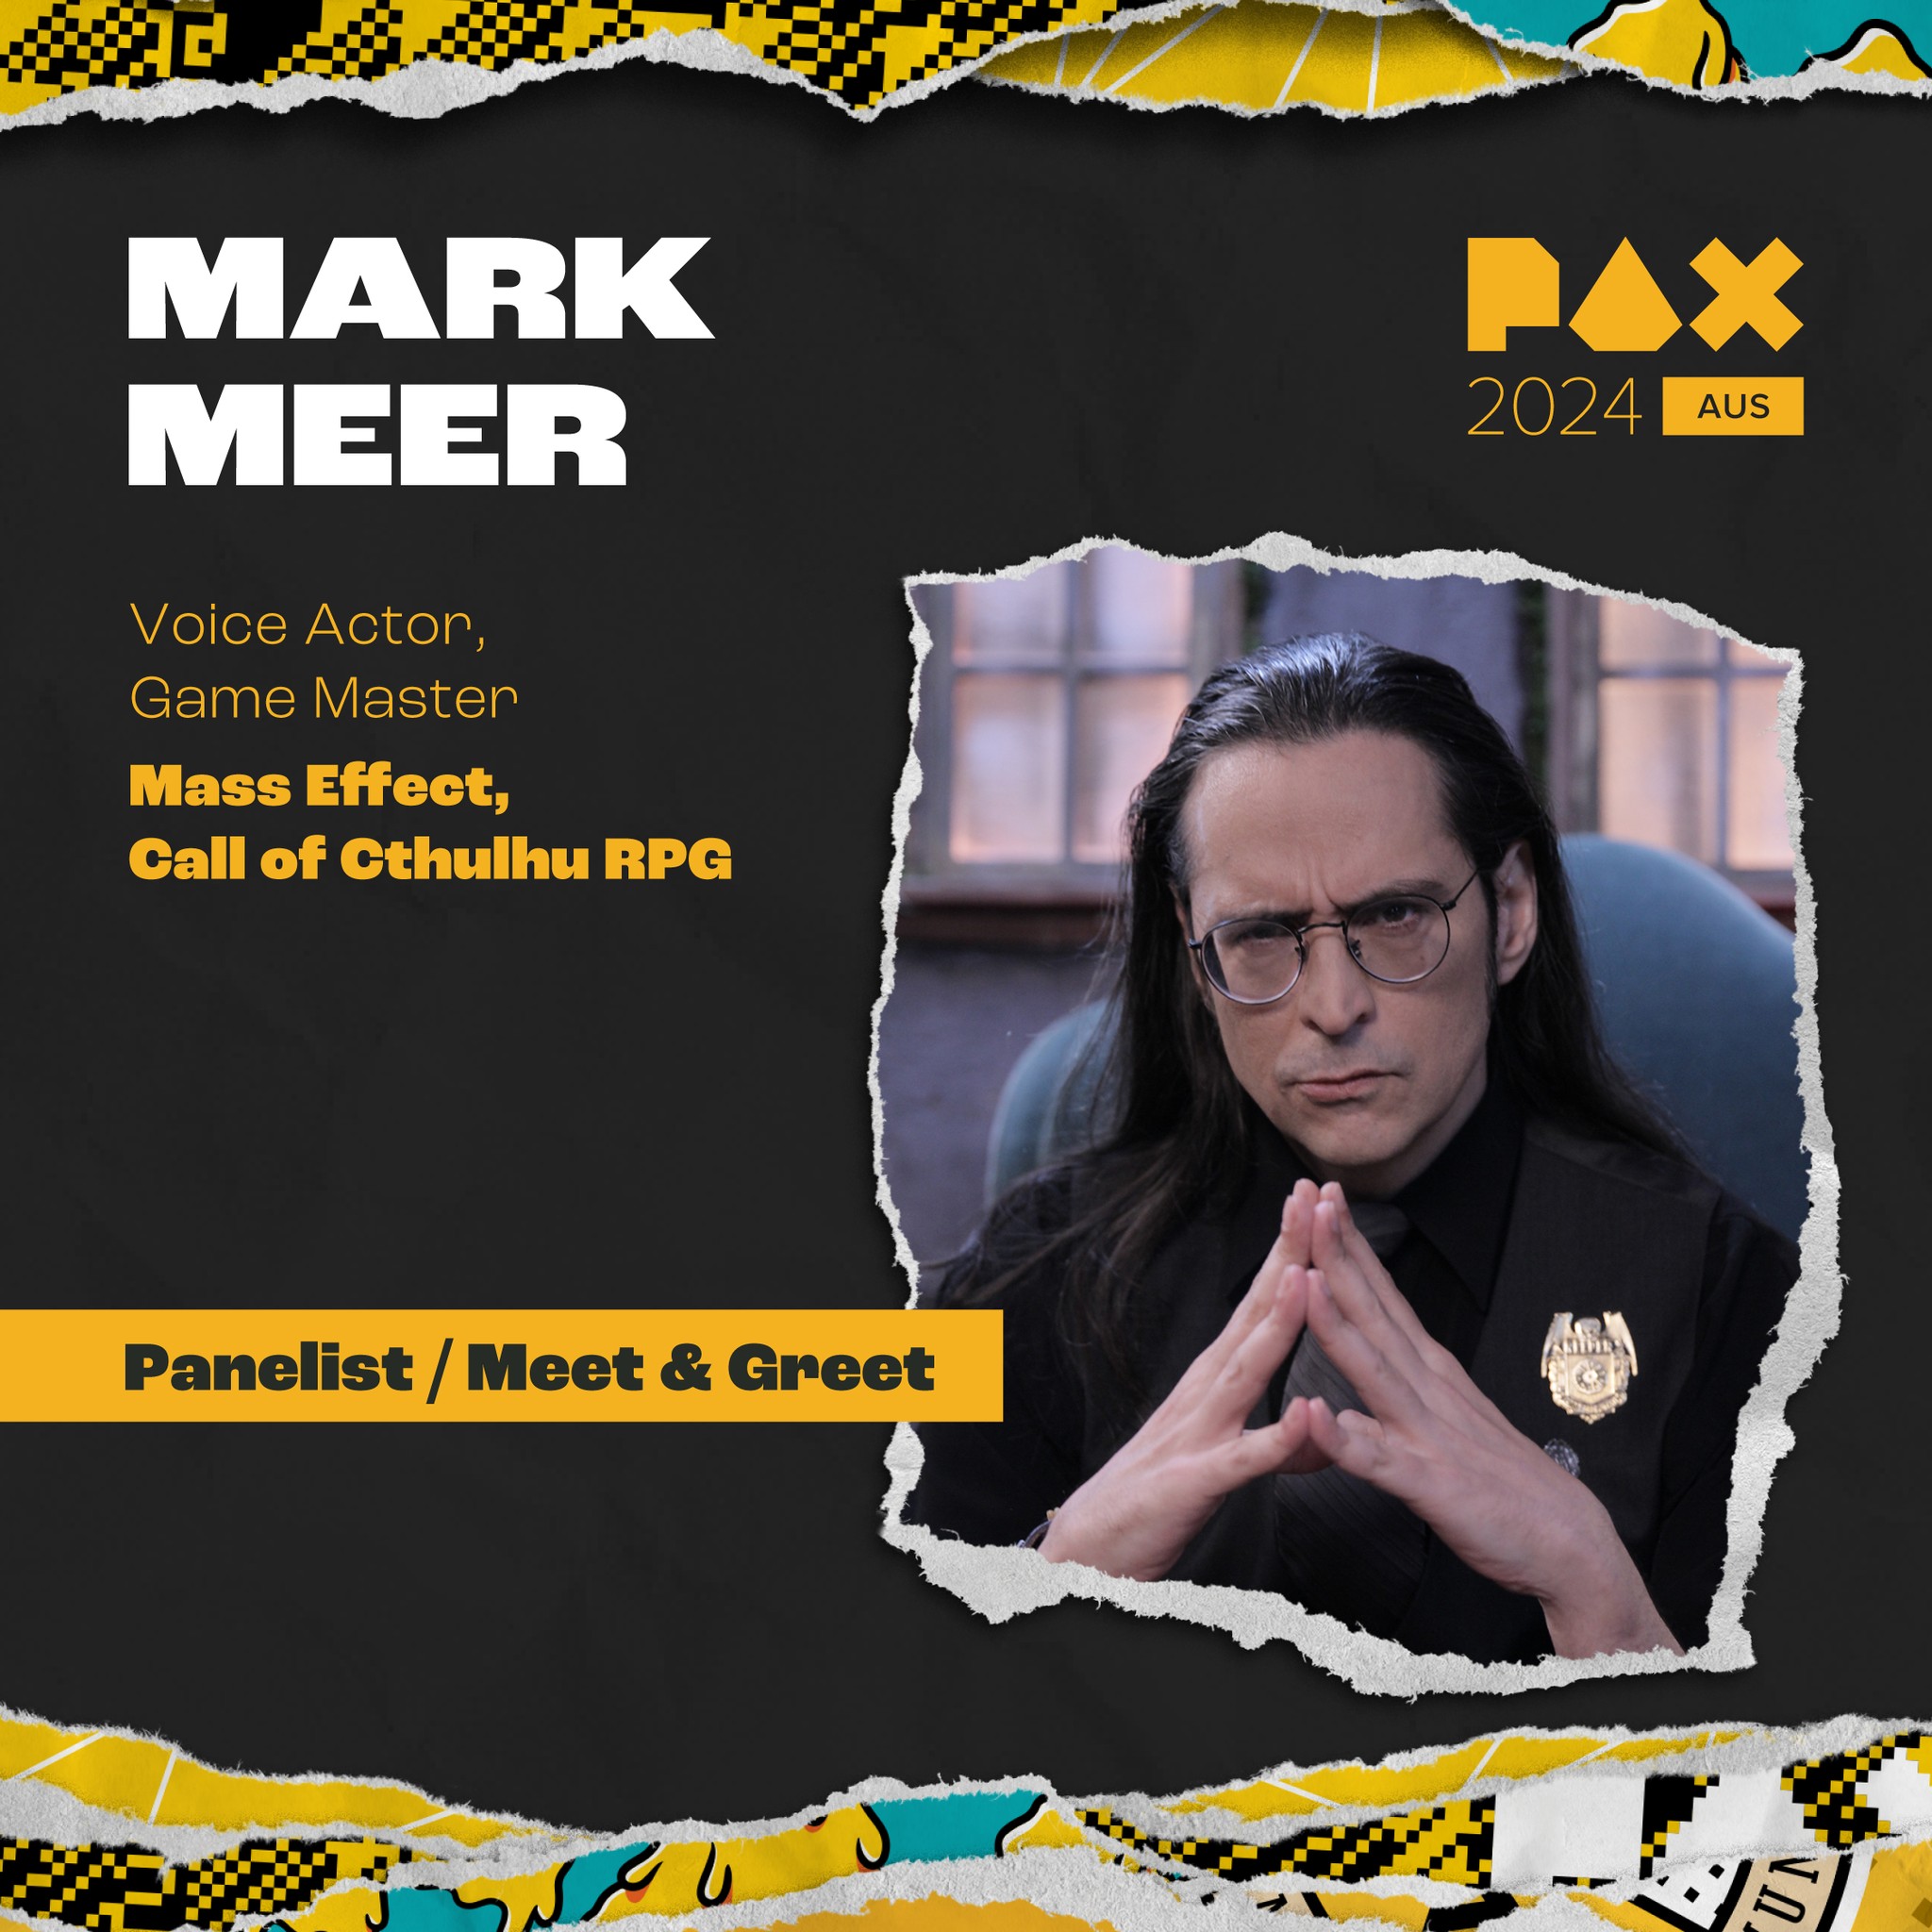 [Chaosium] Mark Meer is coming to PAX AUS in October!